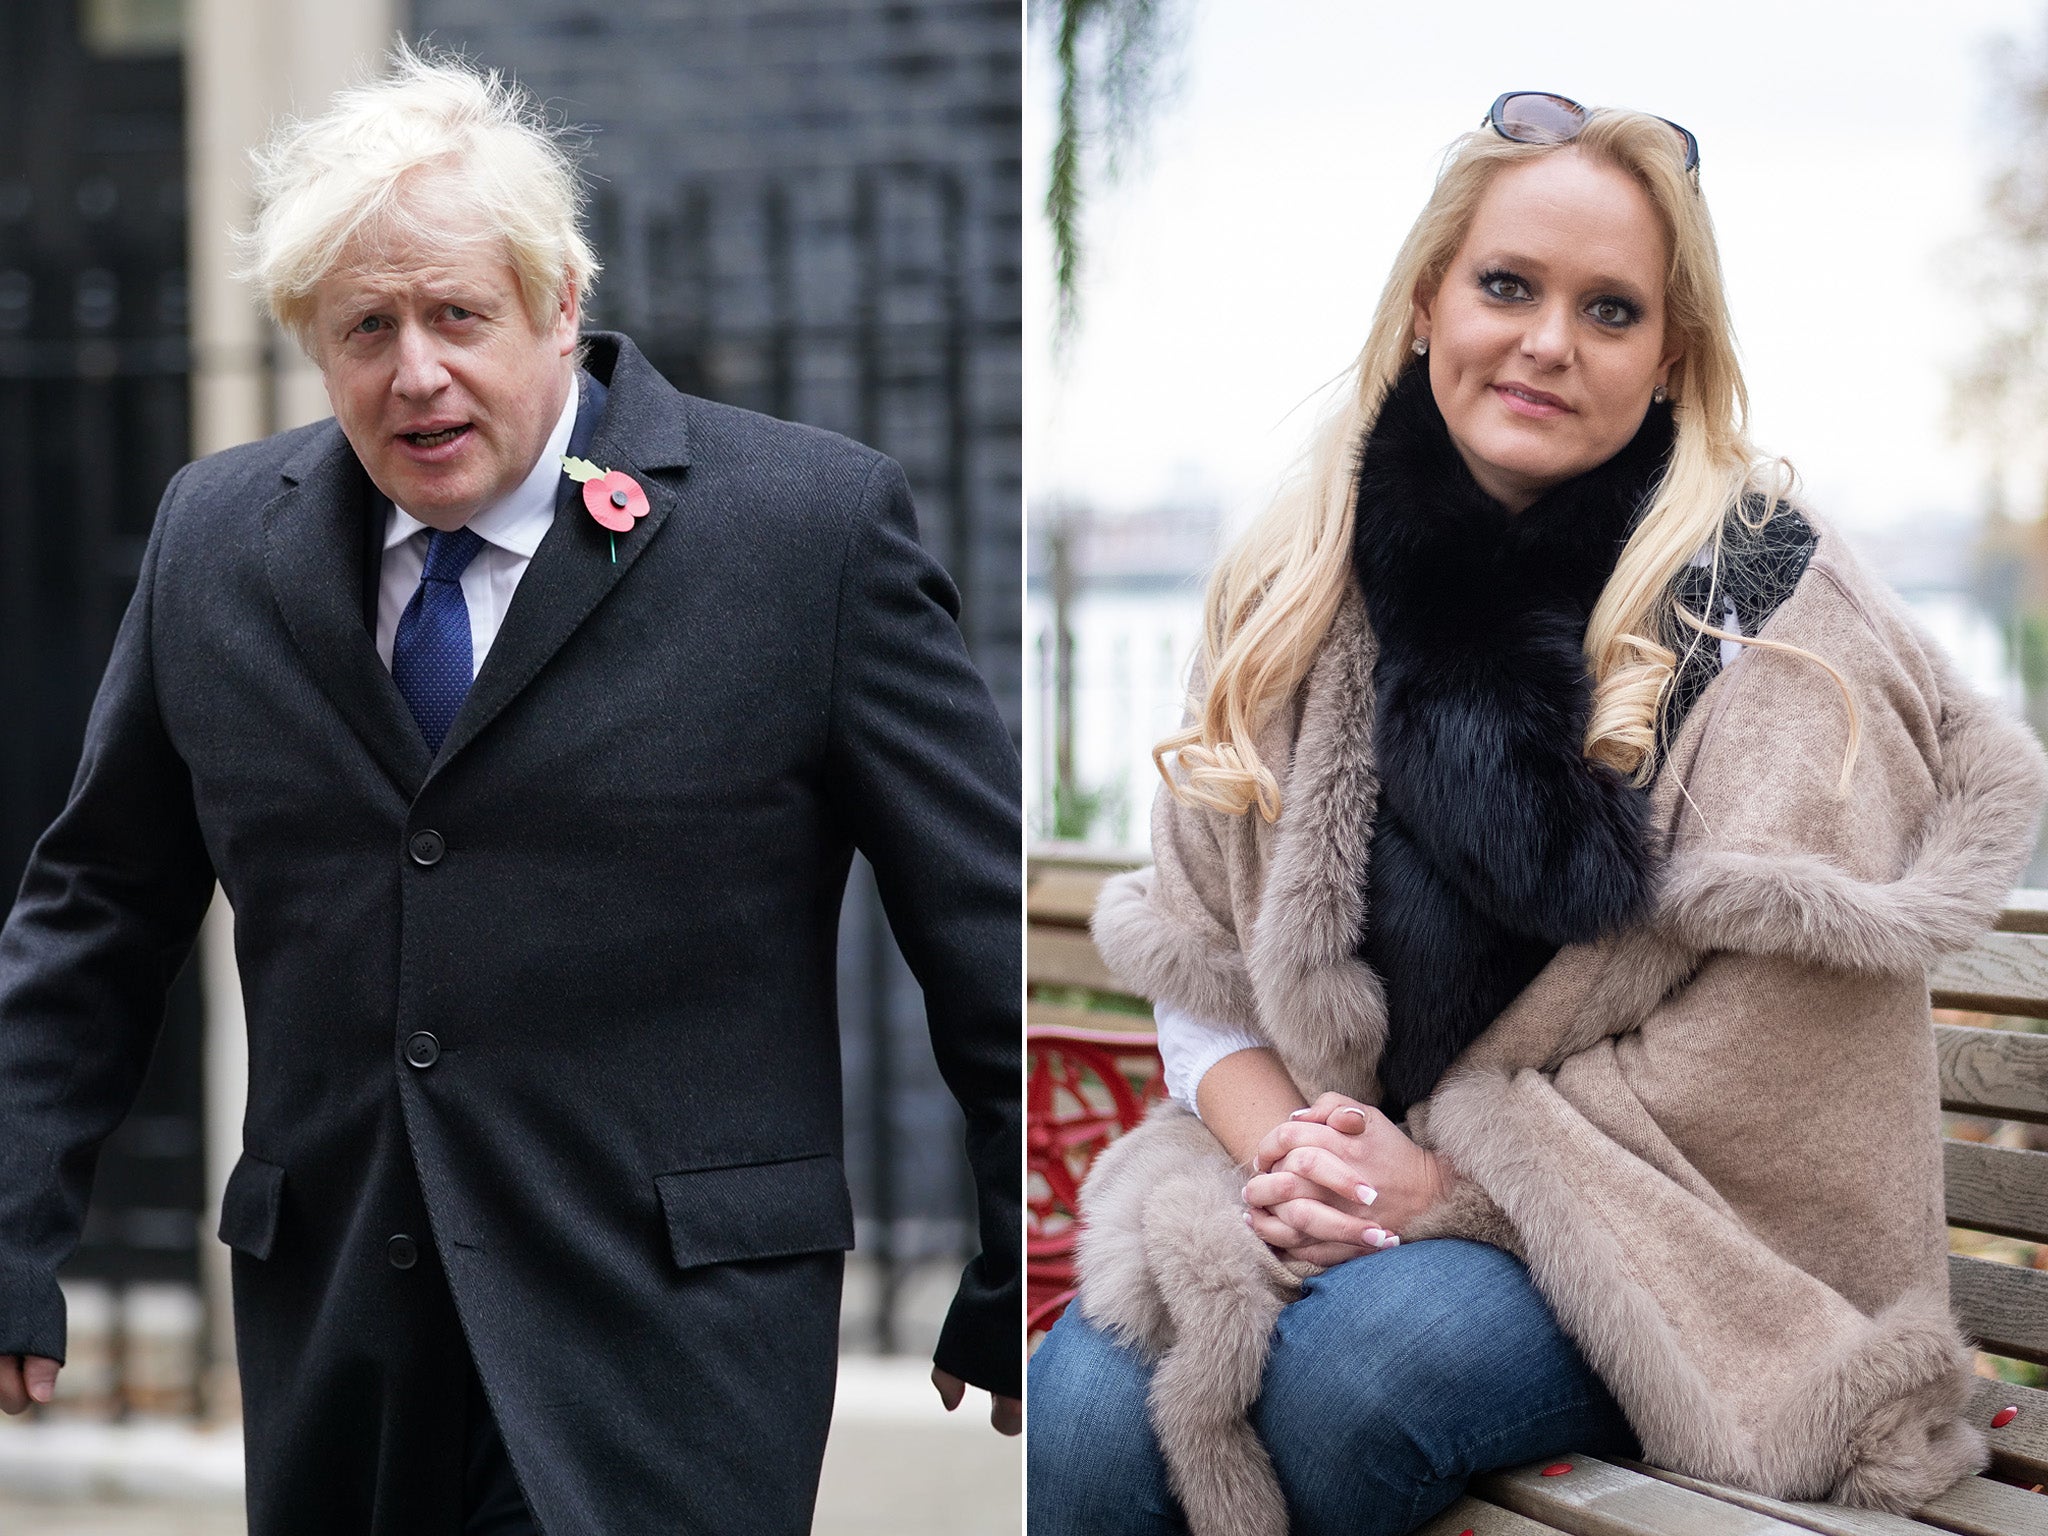 Jennifer Arcuri alleged earlier this year that she had a four-year romantic relationship with Boris Johnson